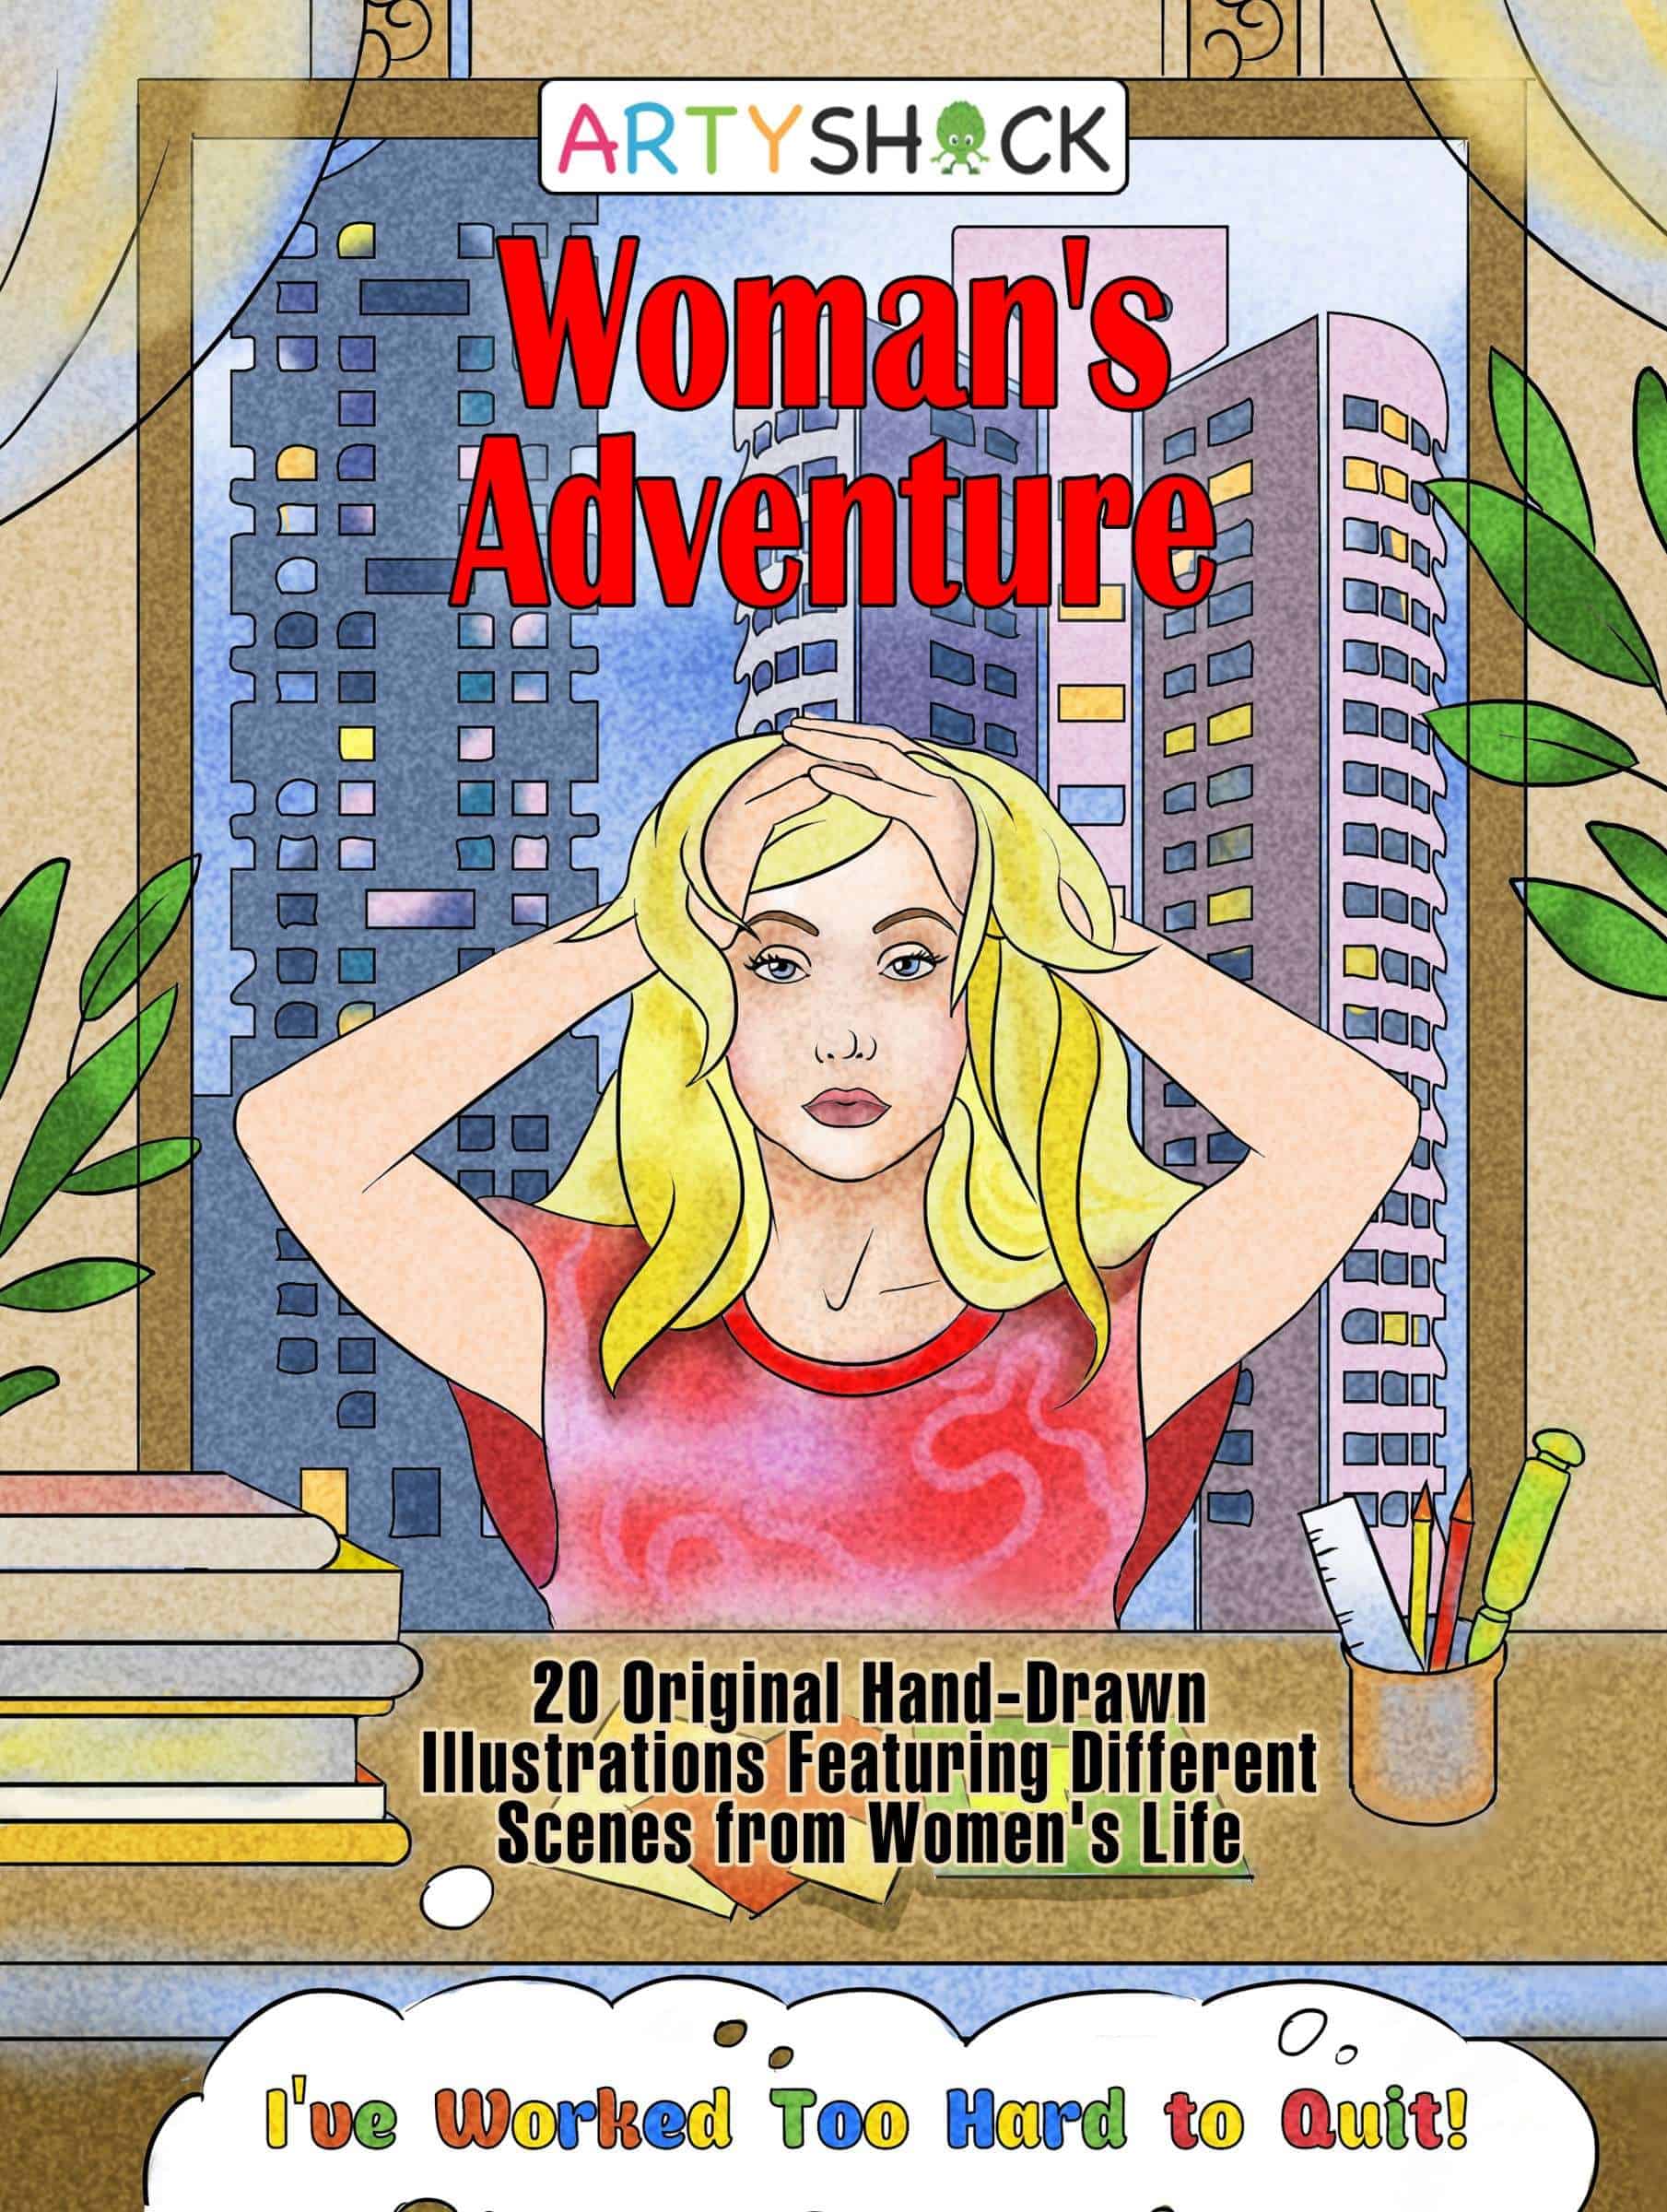 Woman’s Adventure: Original Hand-Drawn Illustrations Featuring Different Scenes from Women’s Life